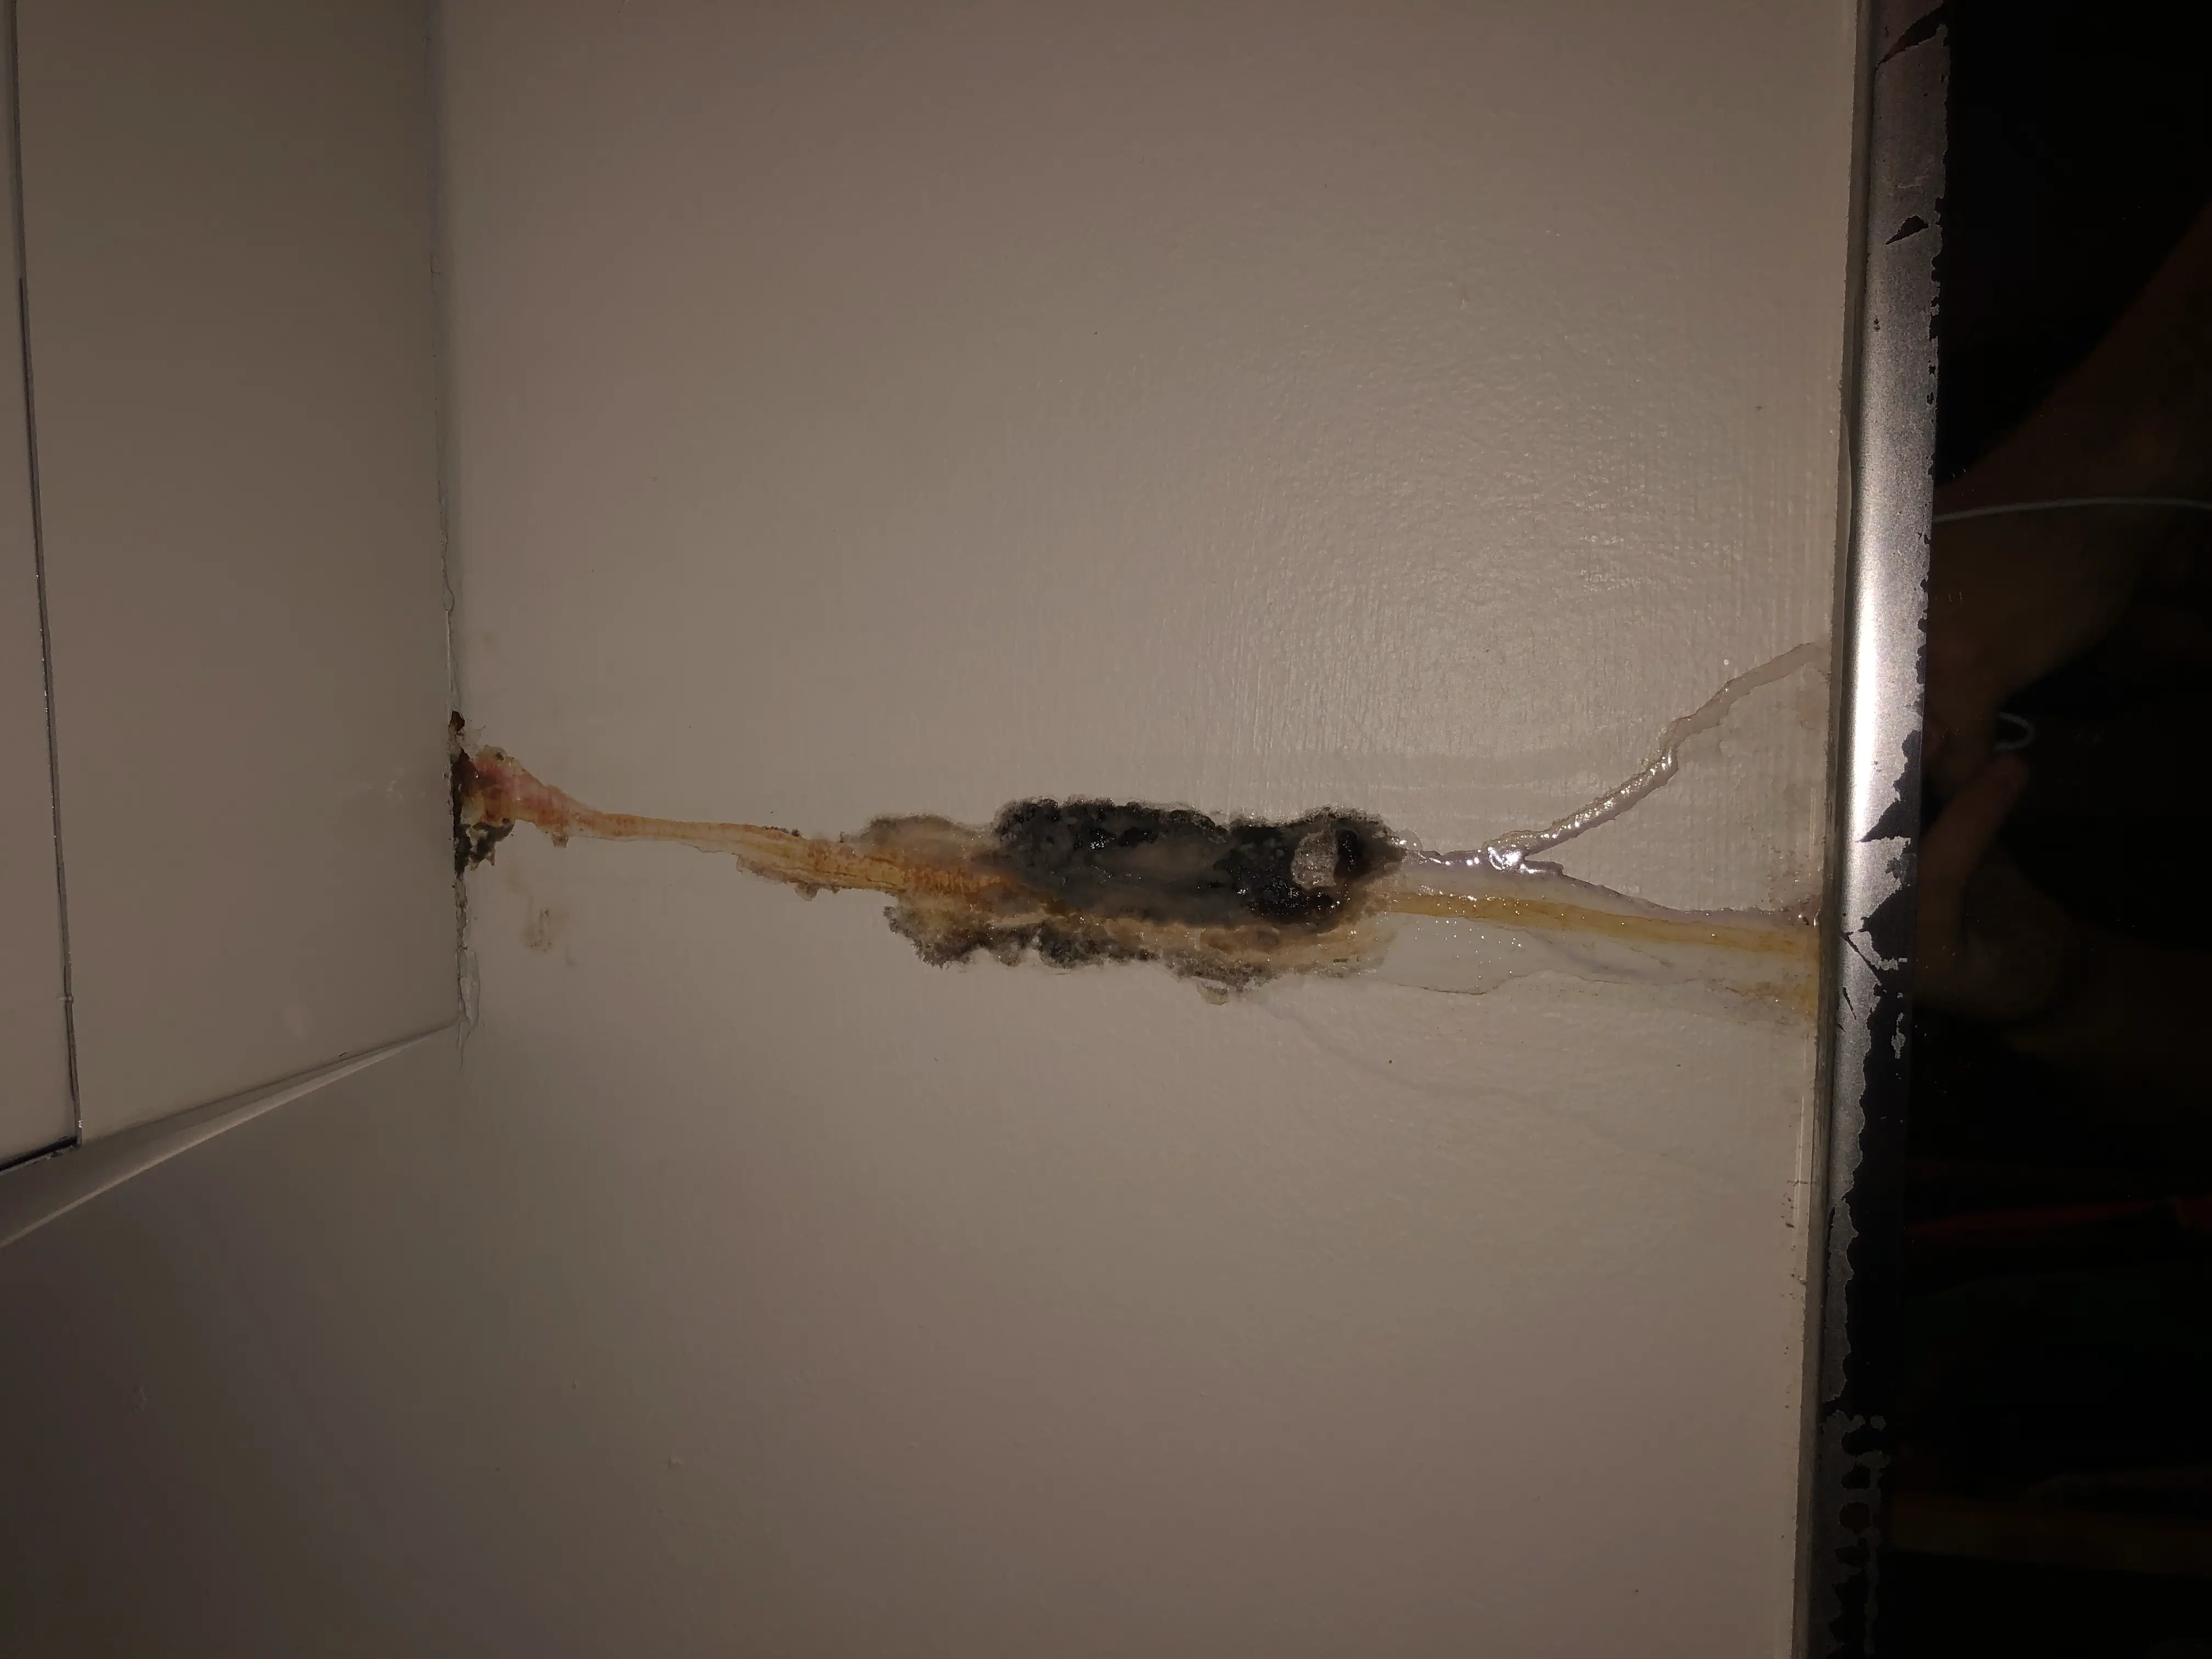 Potential mold problems? This was coming from the AC unit ...